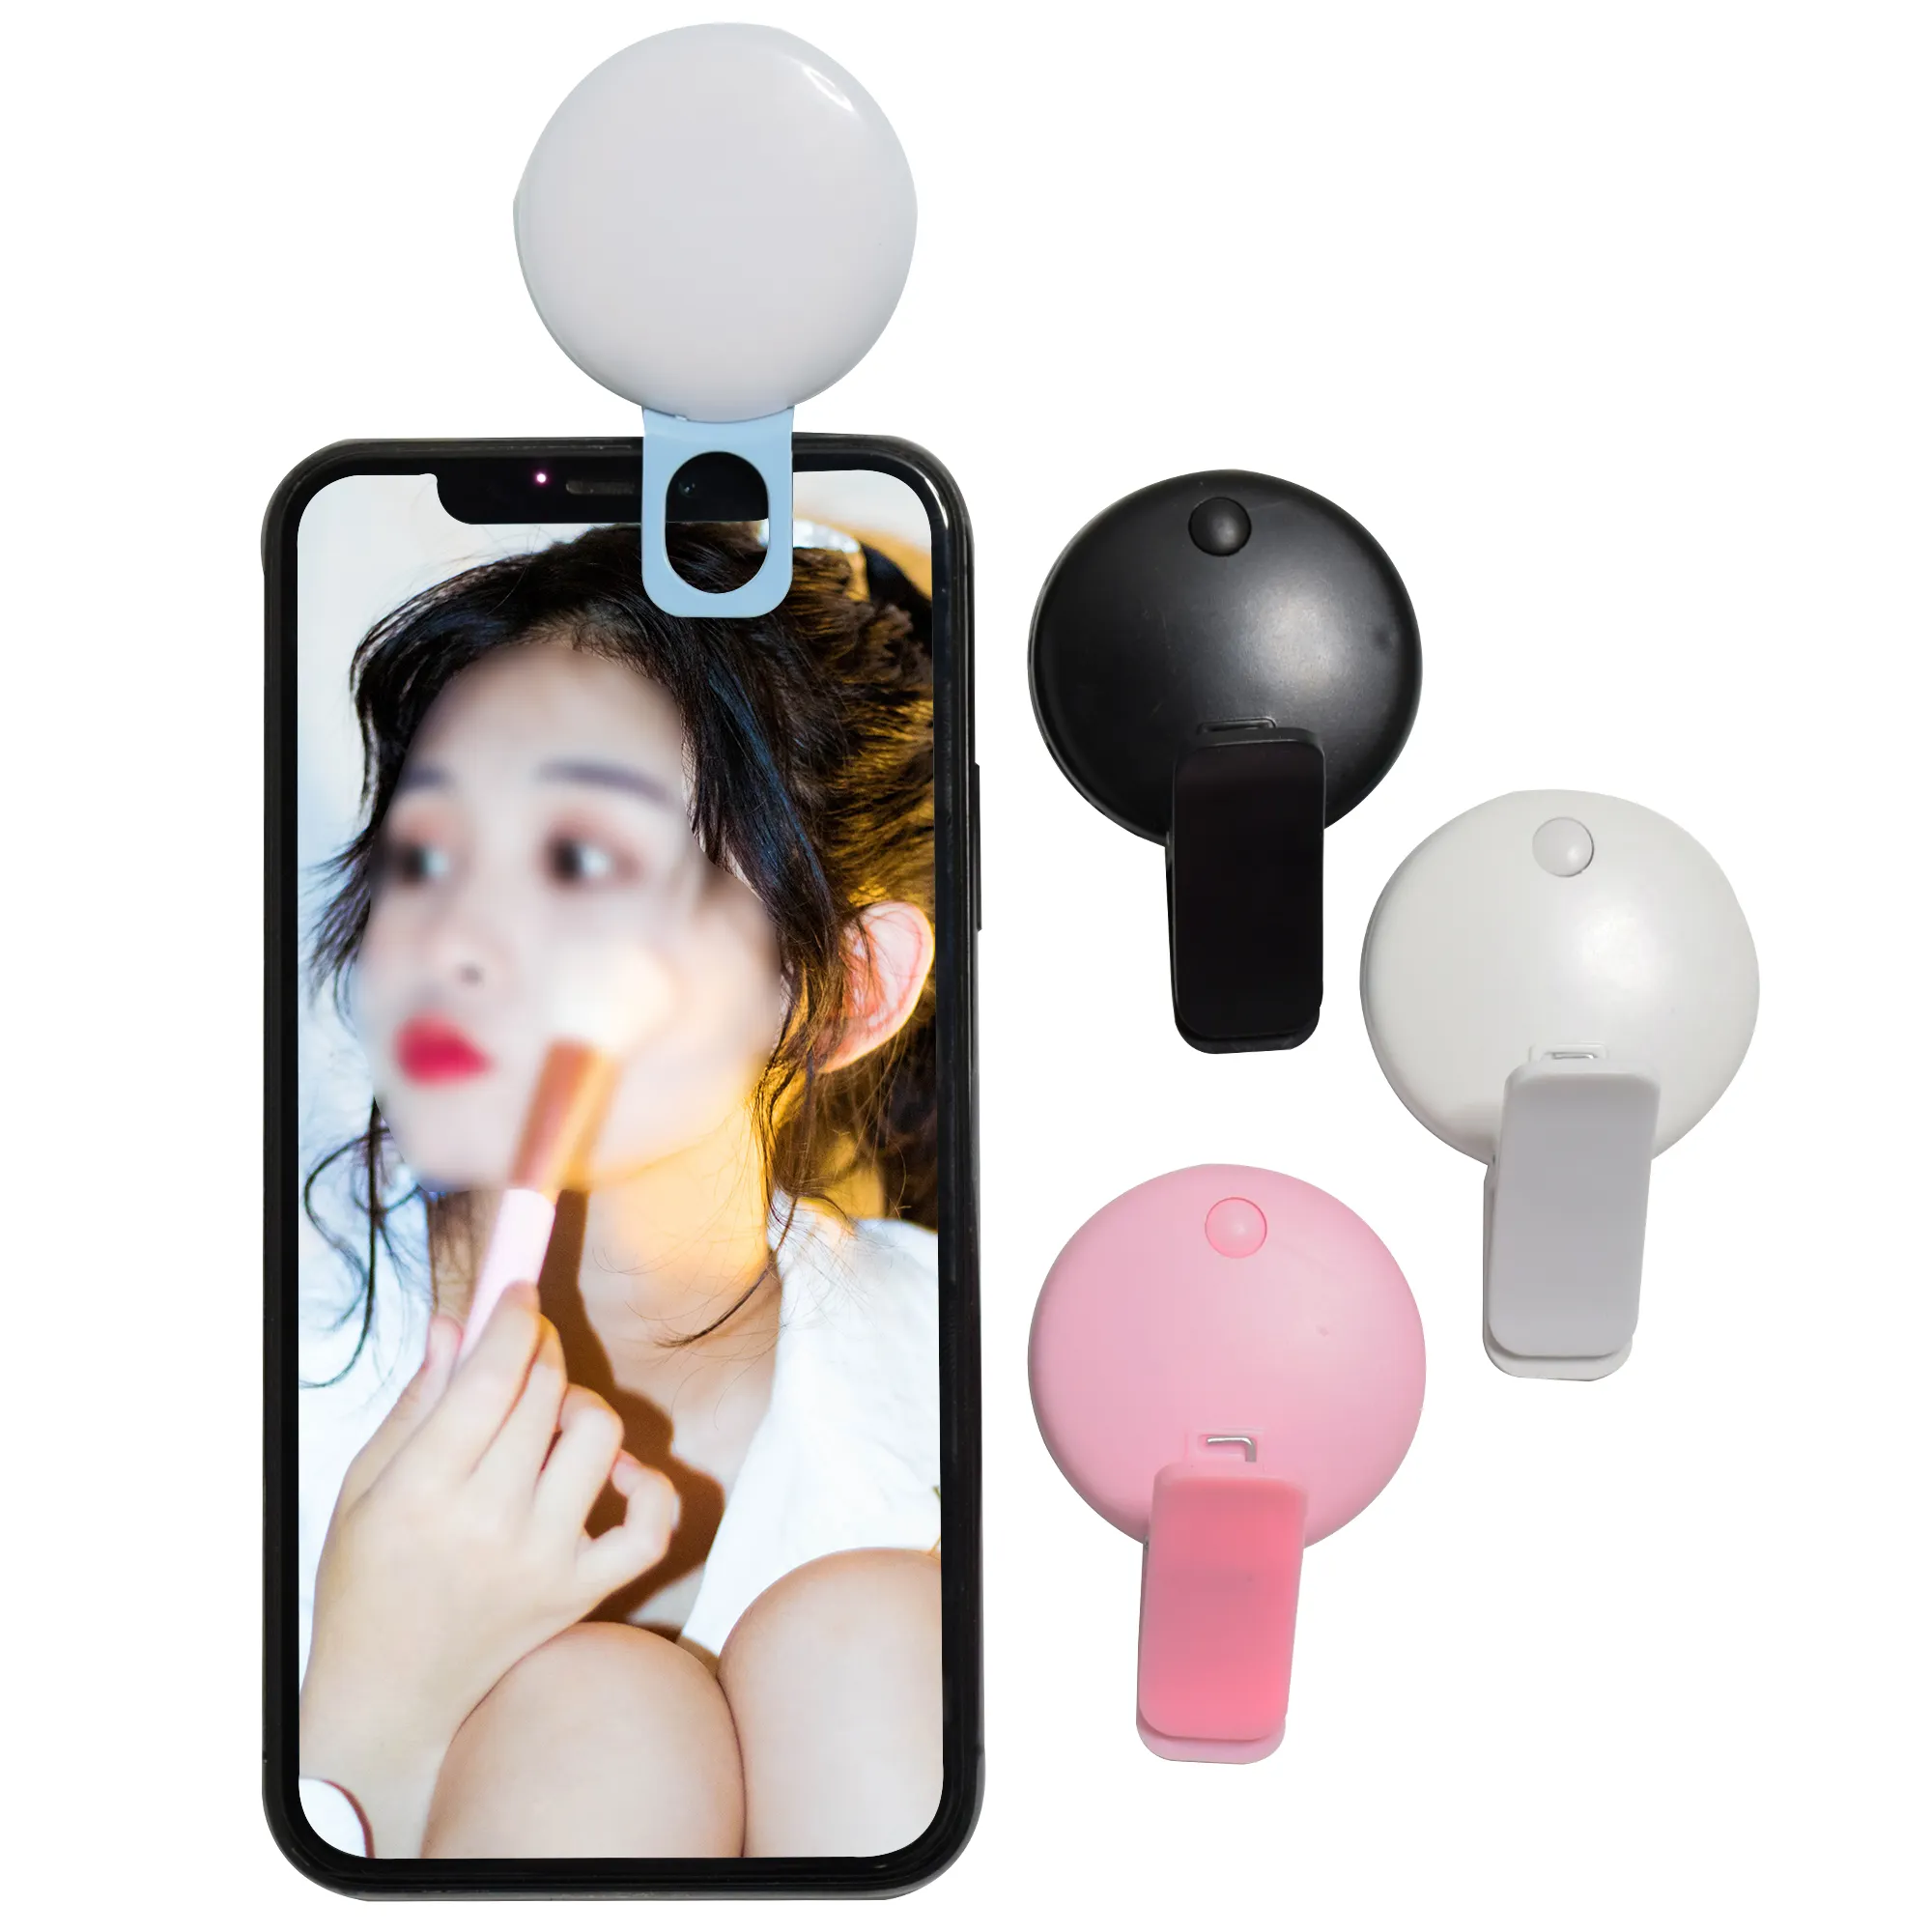 Neon-Glo Ultimate Pocket Flash Selfie Fill Ring Lights Clip On Phone Ringlichtled Lampara Highlight For Live Video